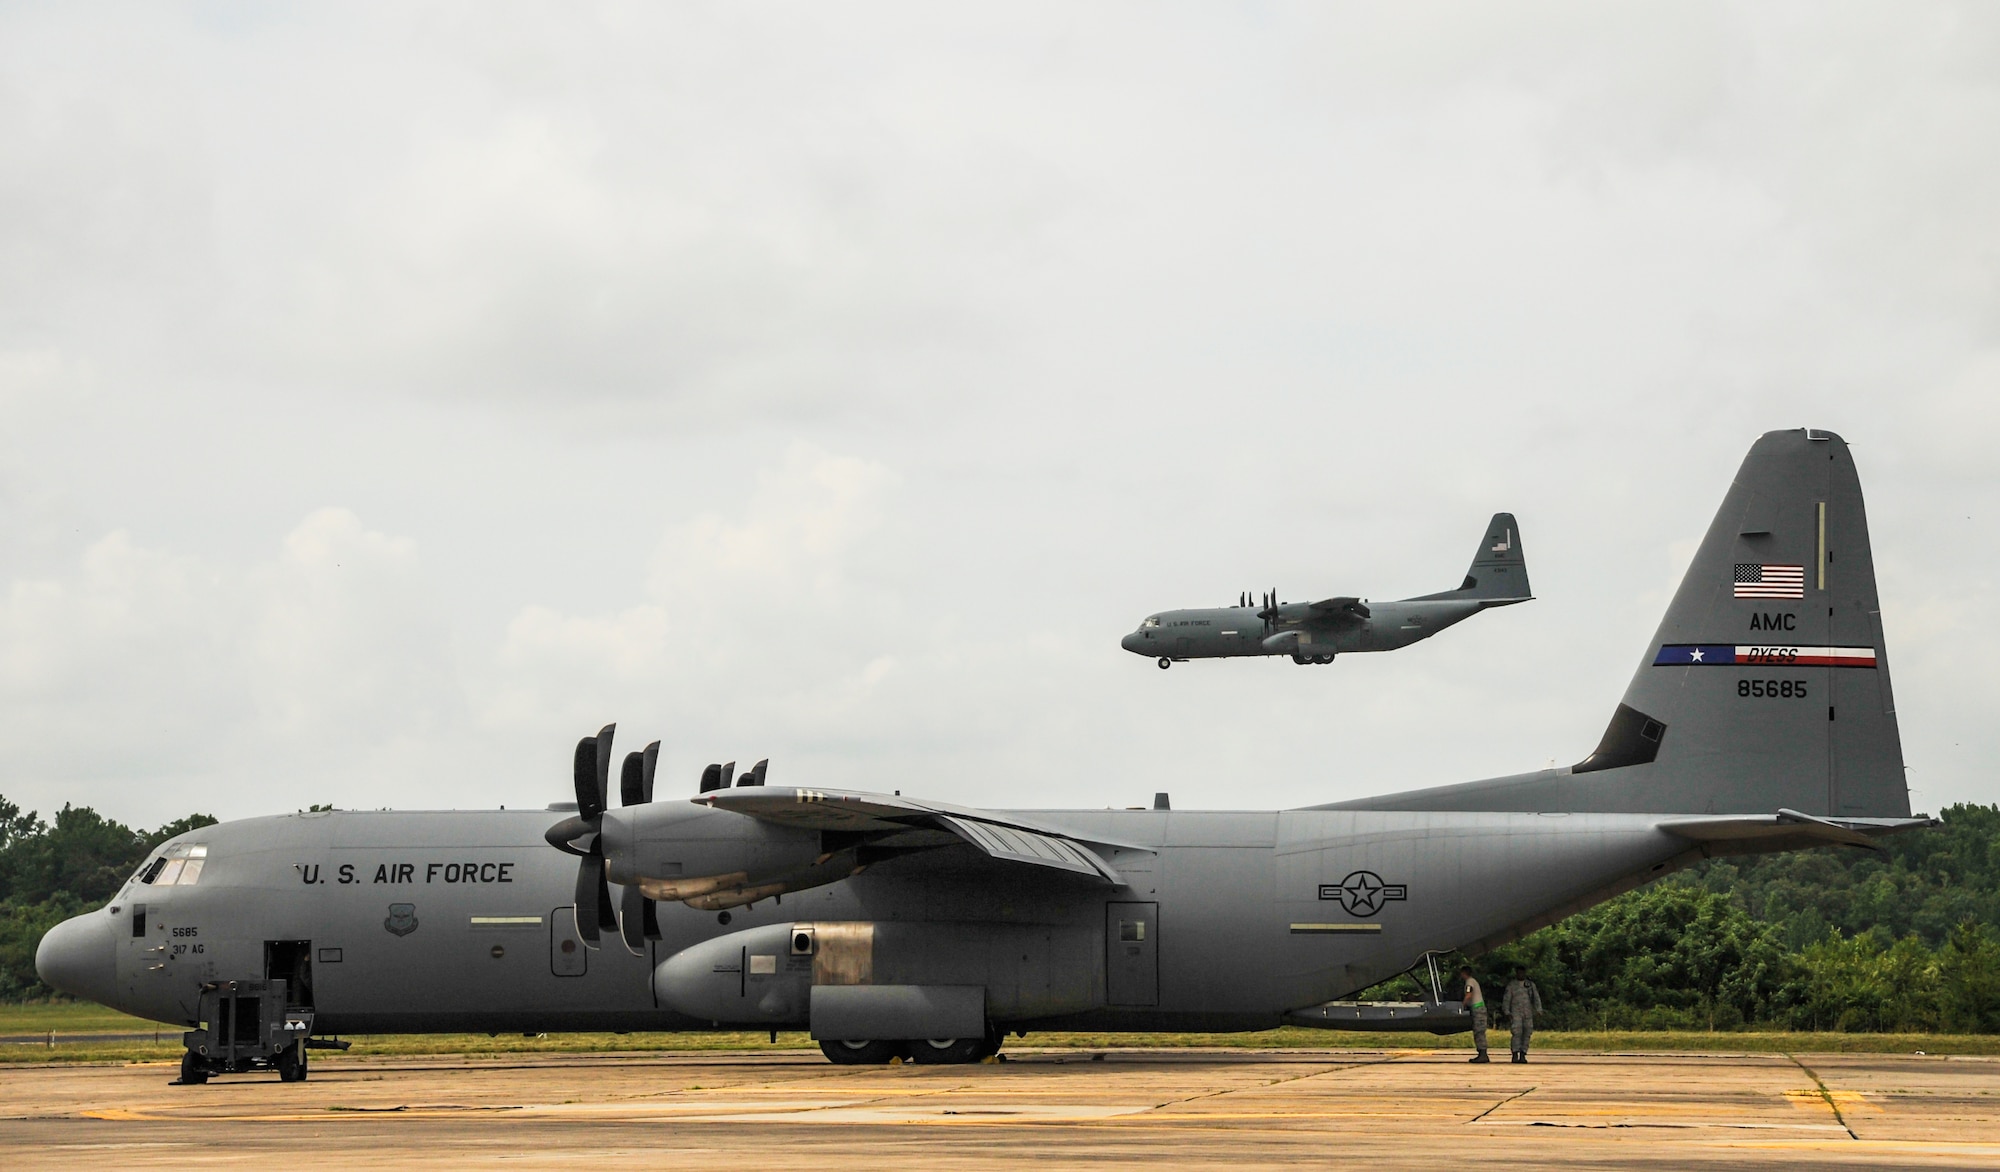 A C-130J prepares to land as a parked C-130J is prepped for departure May 20, 2015, at Little Rock Air Force Base, Ark. The C-130 is one of the most versatile cargo delivery aircraft in the Air Force for its airdrop and air-land mission capabilities (U.S. Air Force photo by Senior Airman Harry Brexel)